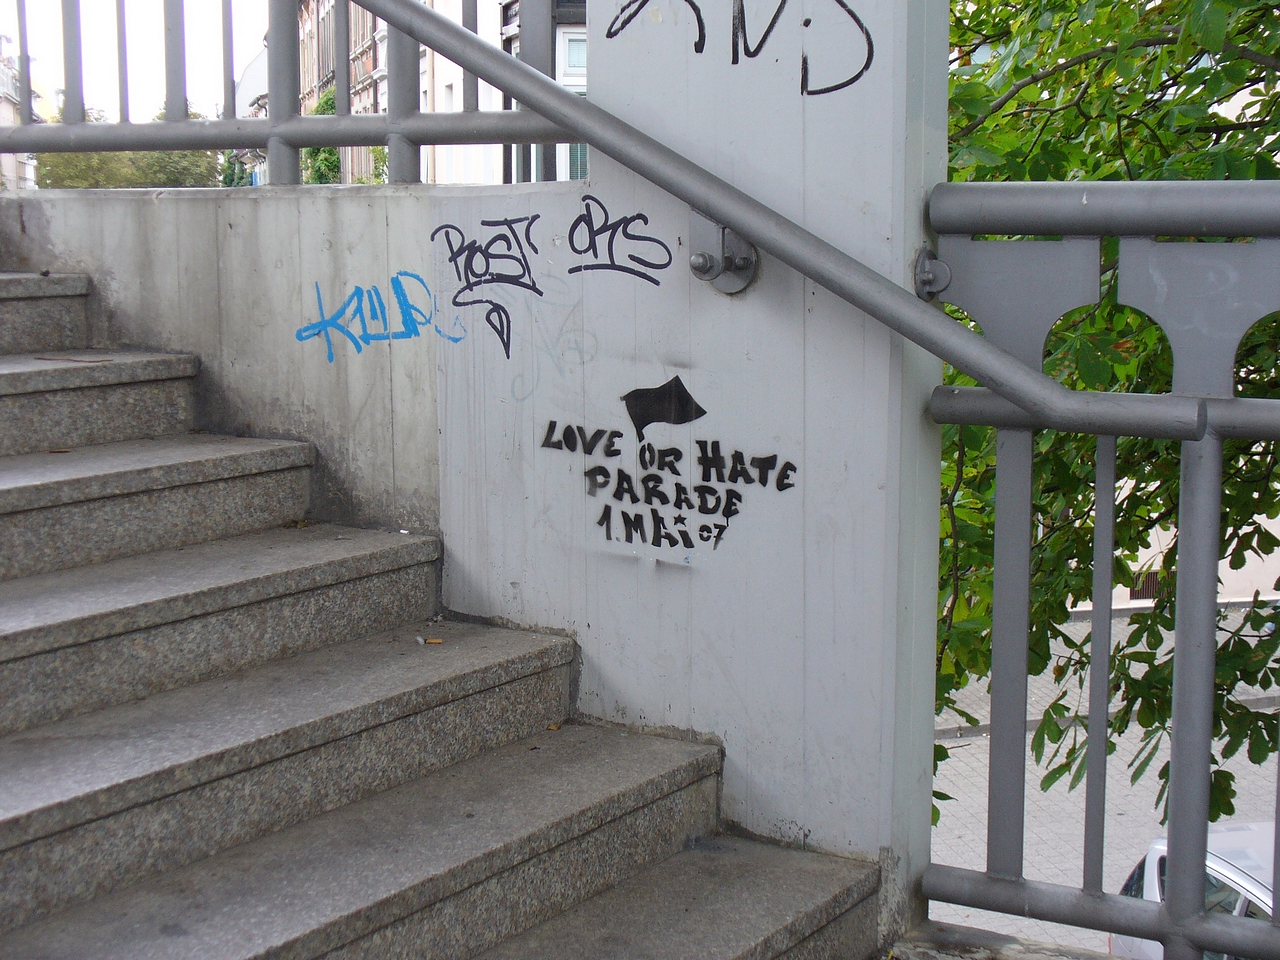 a bunch of graffiti on the wall above stairs